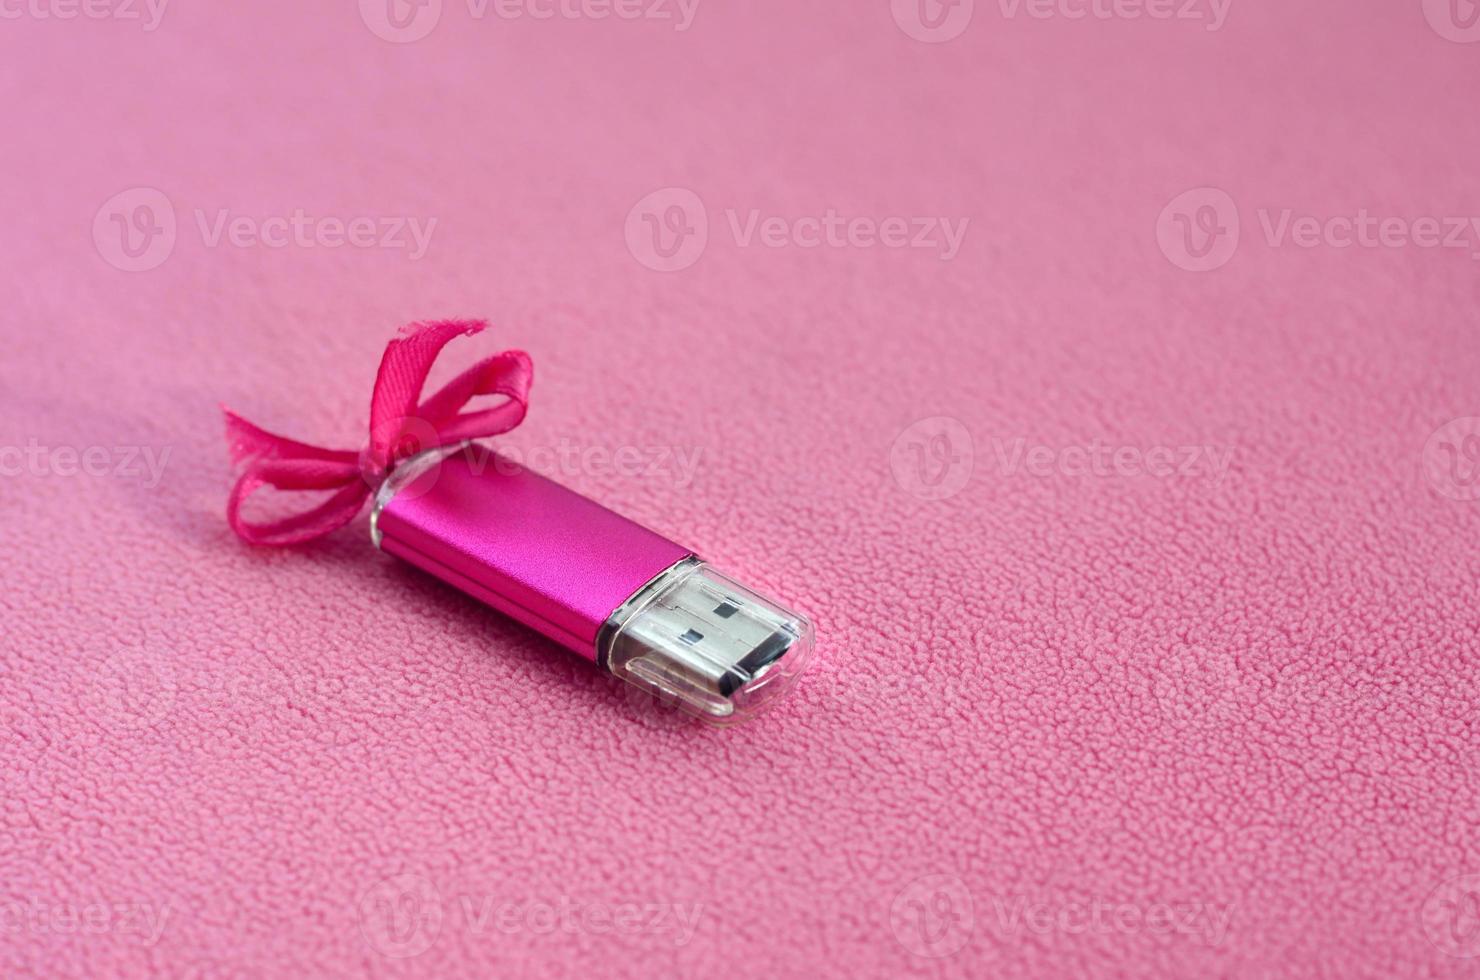 Brilliant pink usb flash memory card with a pink bow lies on a blanket of soft and furry light pink fleece fabric. Classic female gift design for a memory card photo